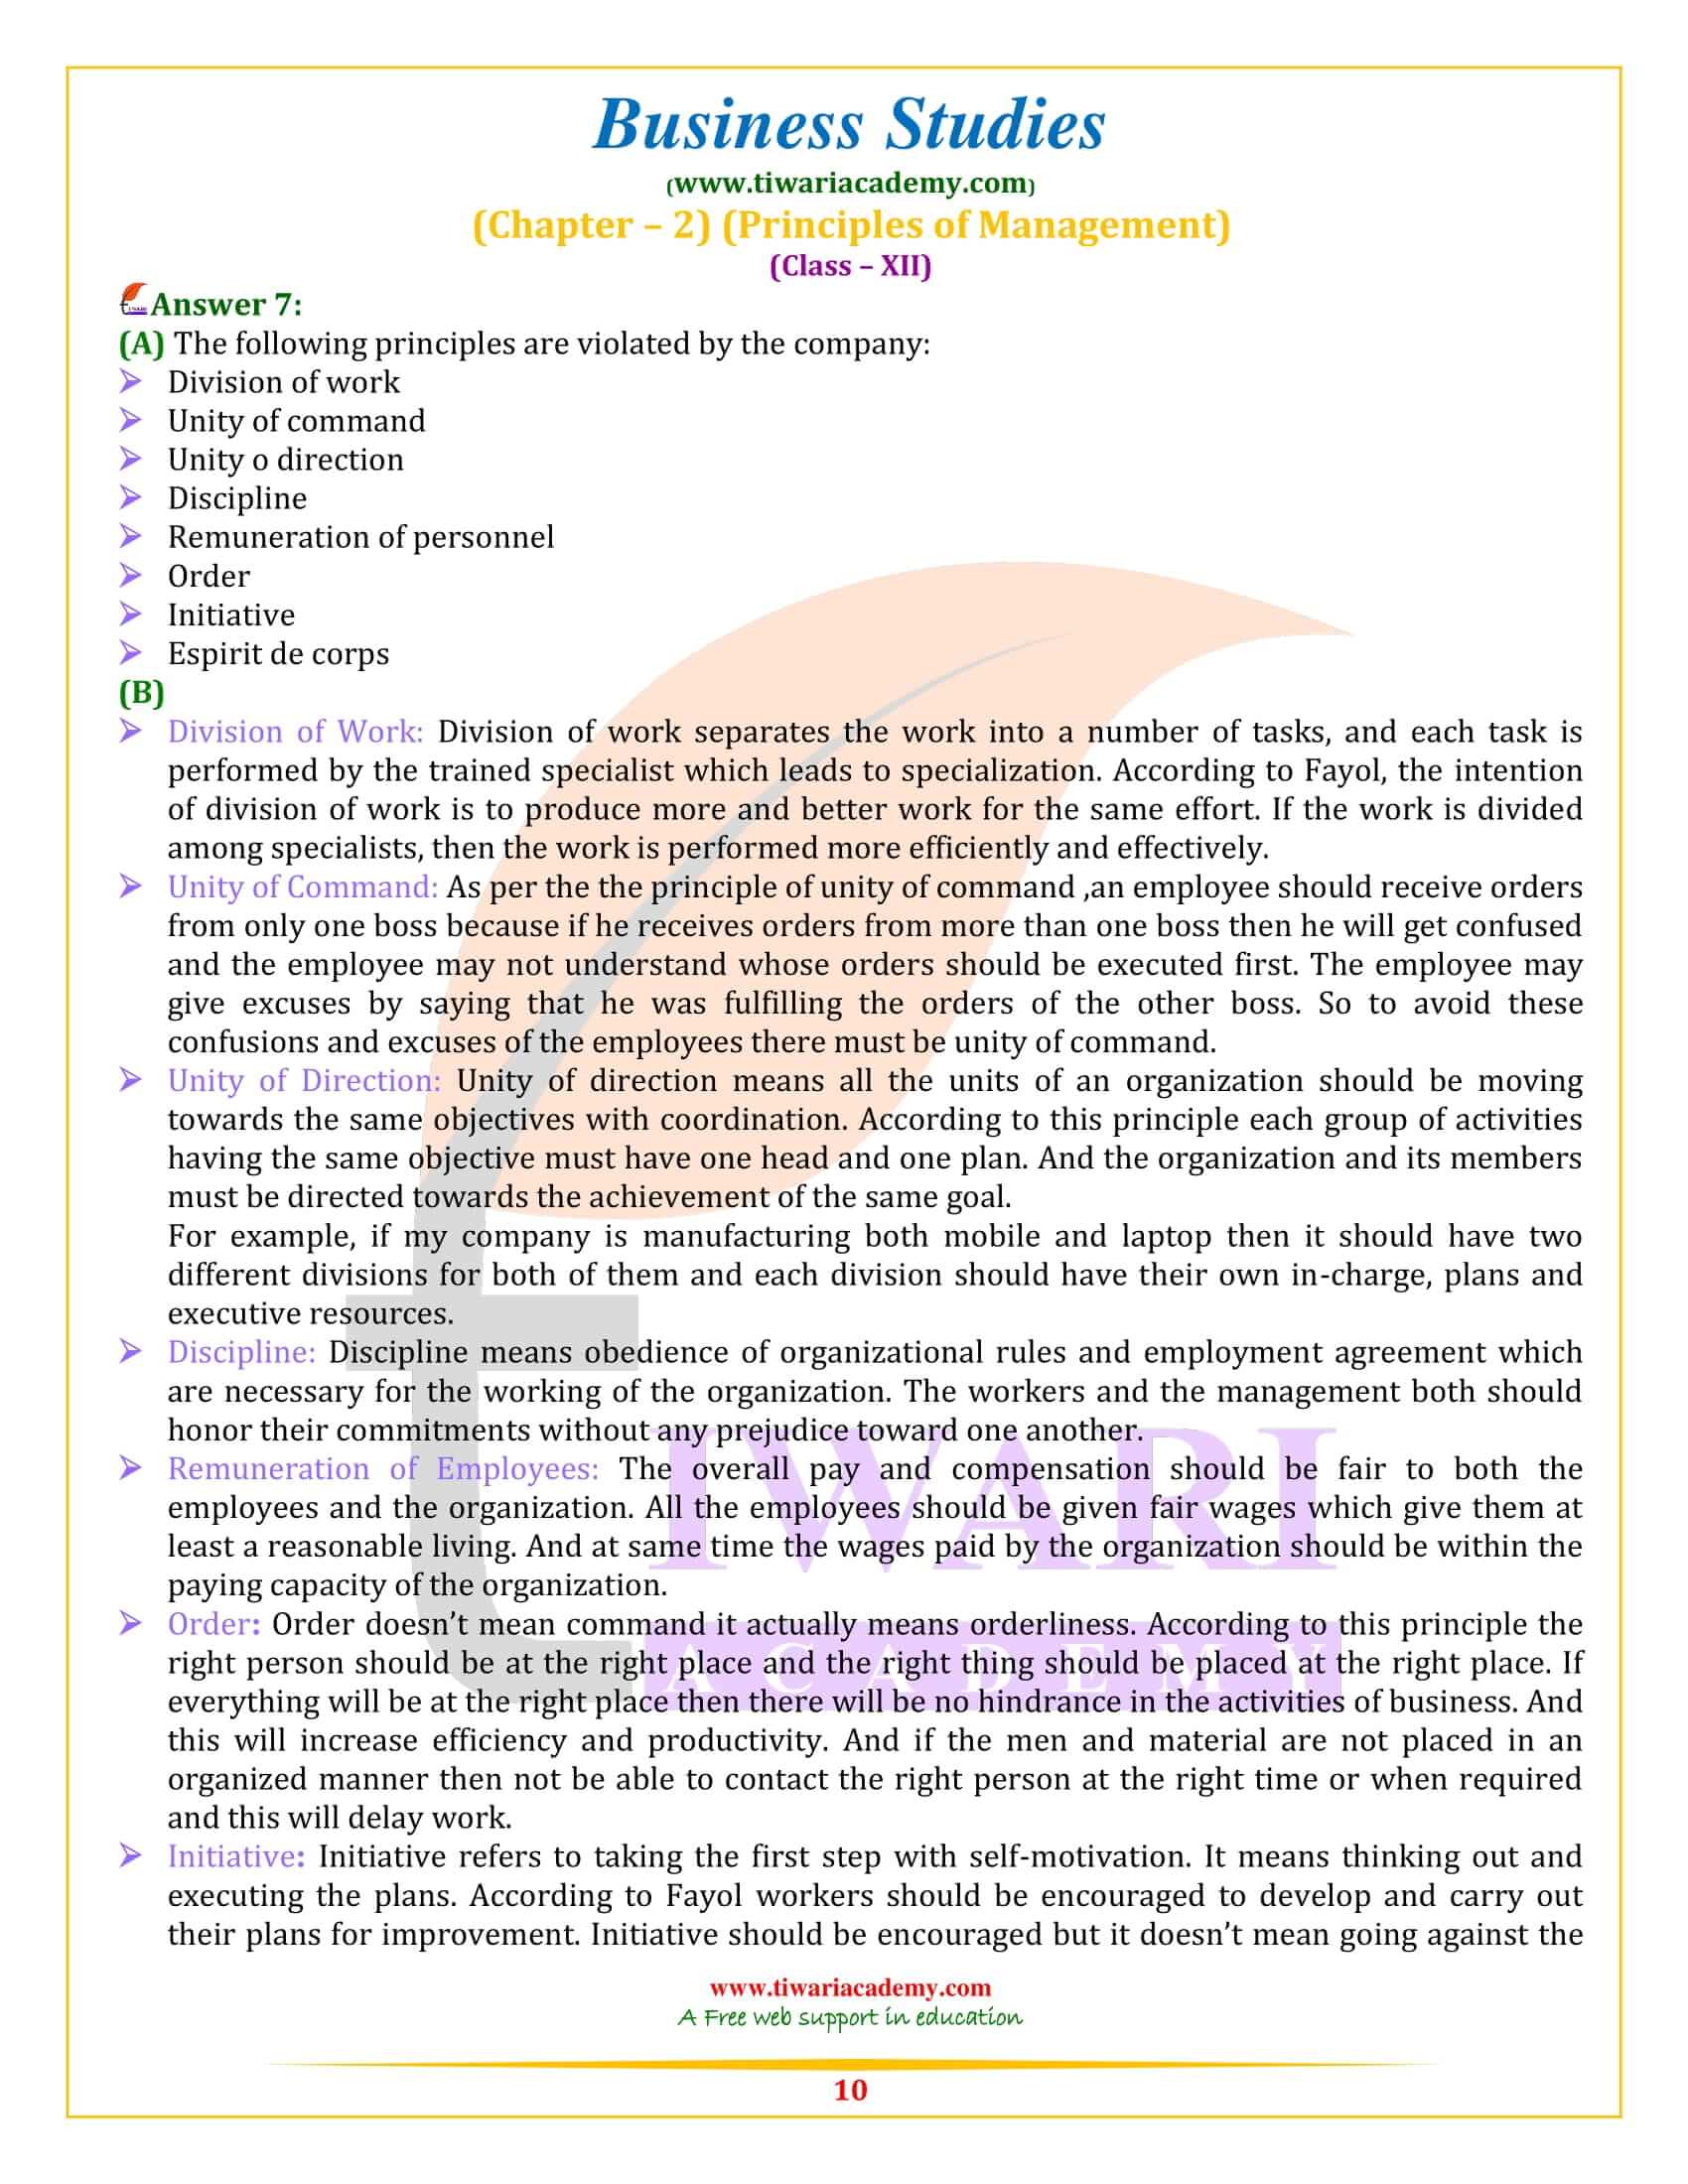 NCERT Solutions for Class 12 Business Studies Chapter 2 questions 1, 2, 3, 4